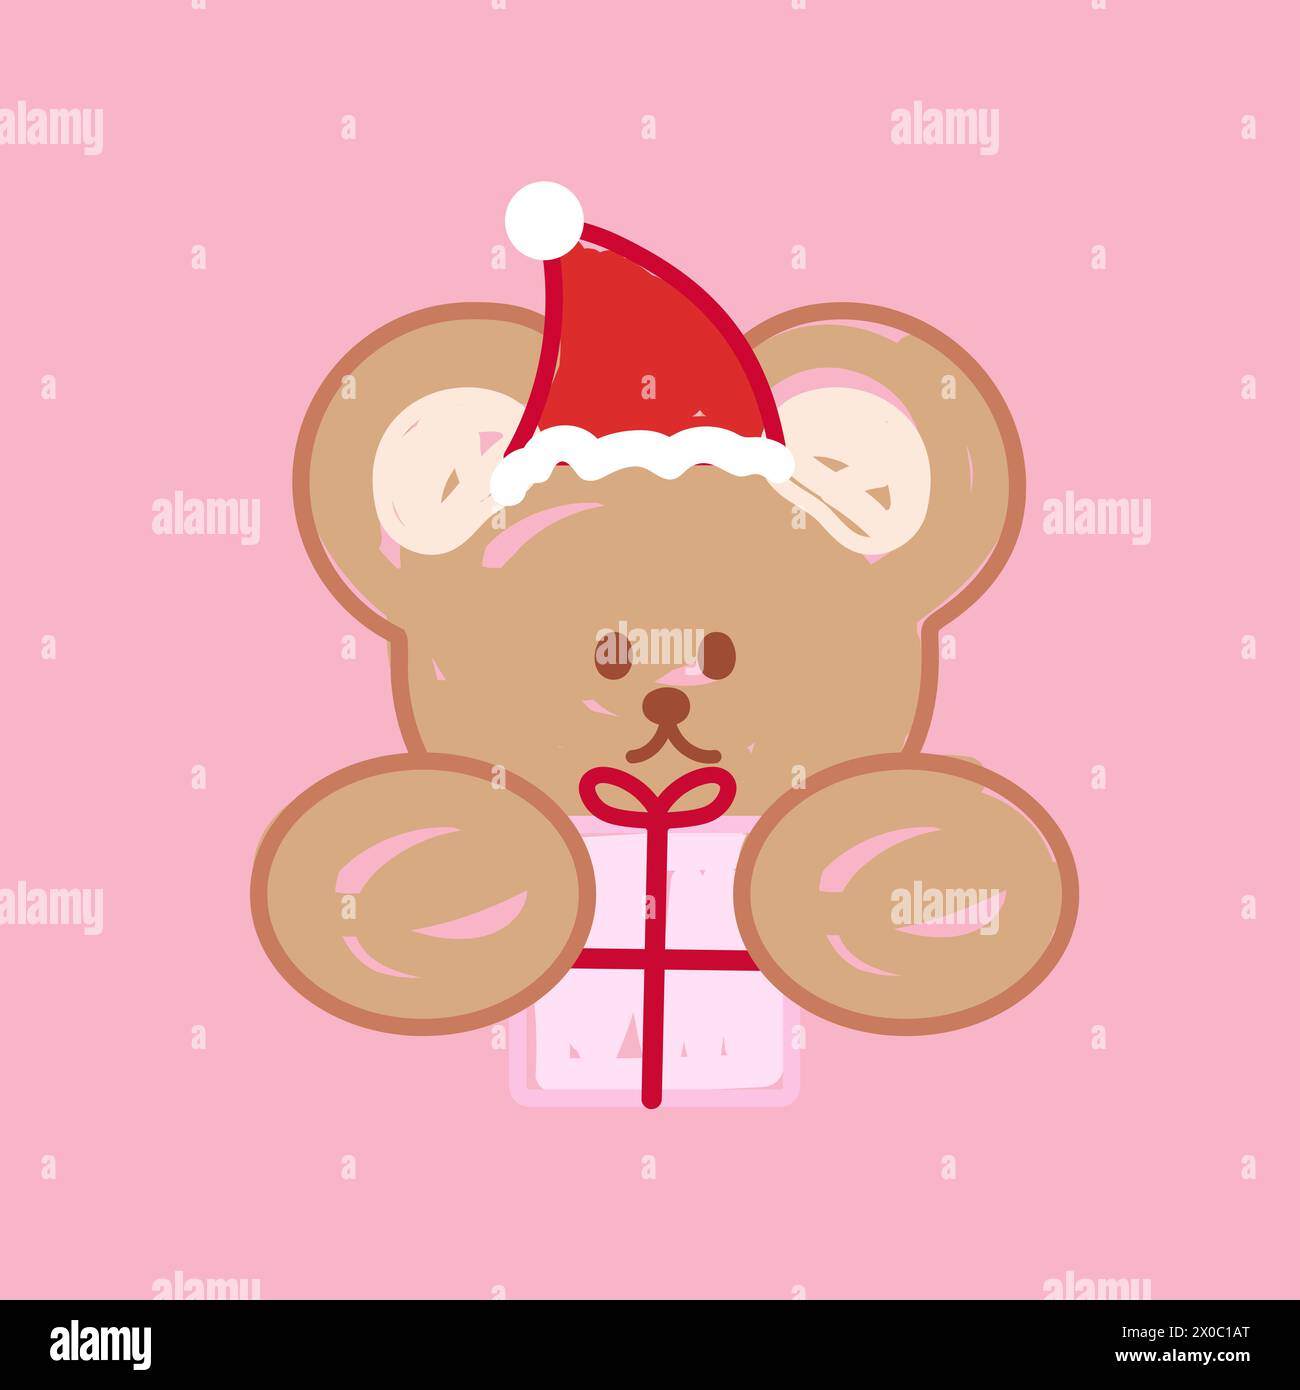 Illustration of teddy bear, Christmas hat, gift box on a pastel pink background for Christmas card, print, cartoon, character, animal, zoo, wallpaper Stock Vector